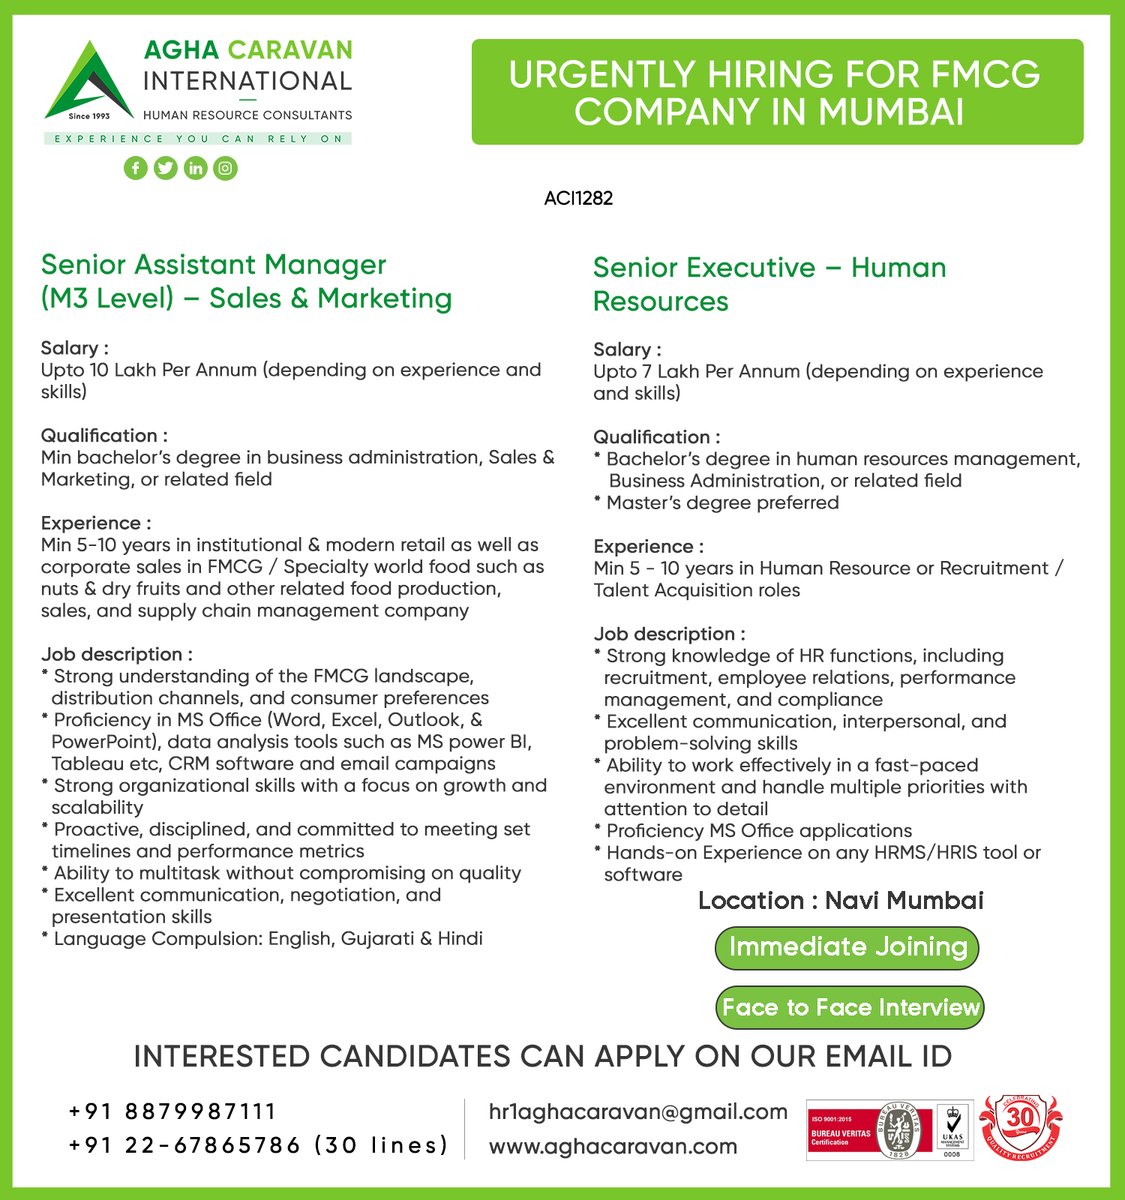 Greetings from Agha Caravan!
Kindly apply on the given email with your updated CV and position in the subject line.
Thank you.
#acijobs #jobseekers #mumbaijobs #mumbai #assistantmanager #humanresources #executive #applynow #jobvacancy #Jobopportunity